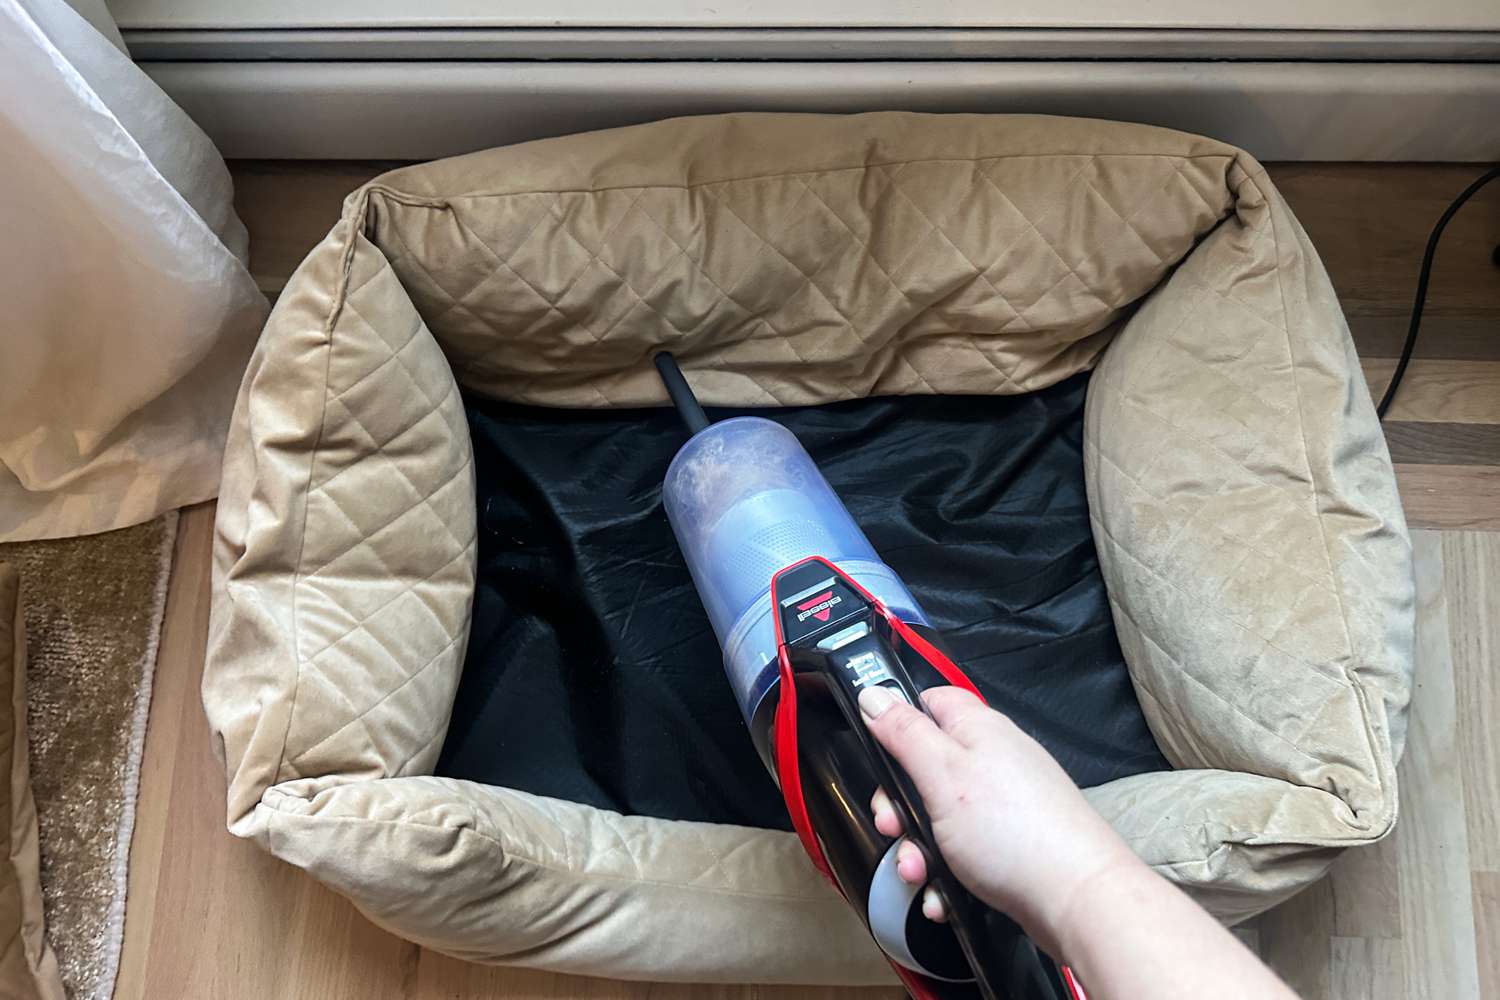 A person uses the Bissell CleanView Pet Slim Corded Stick Vacuum to clean a dog bed